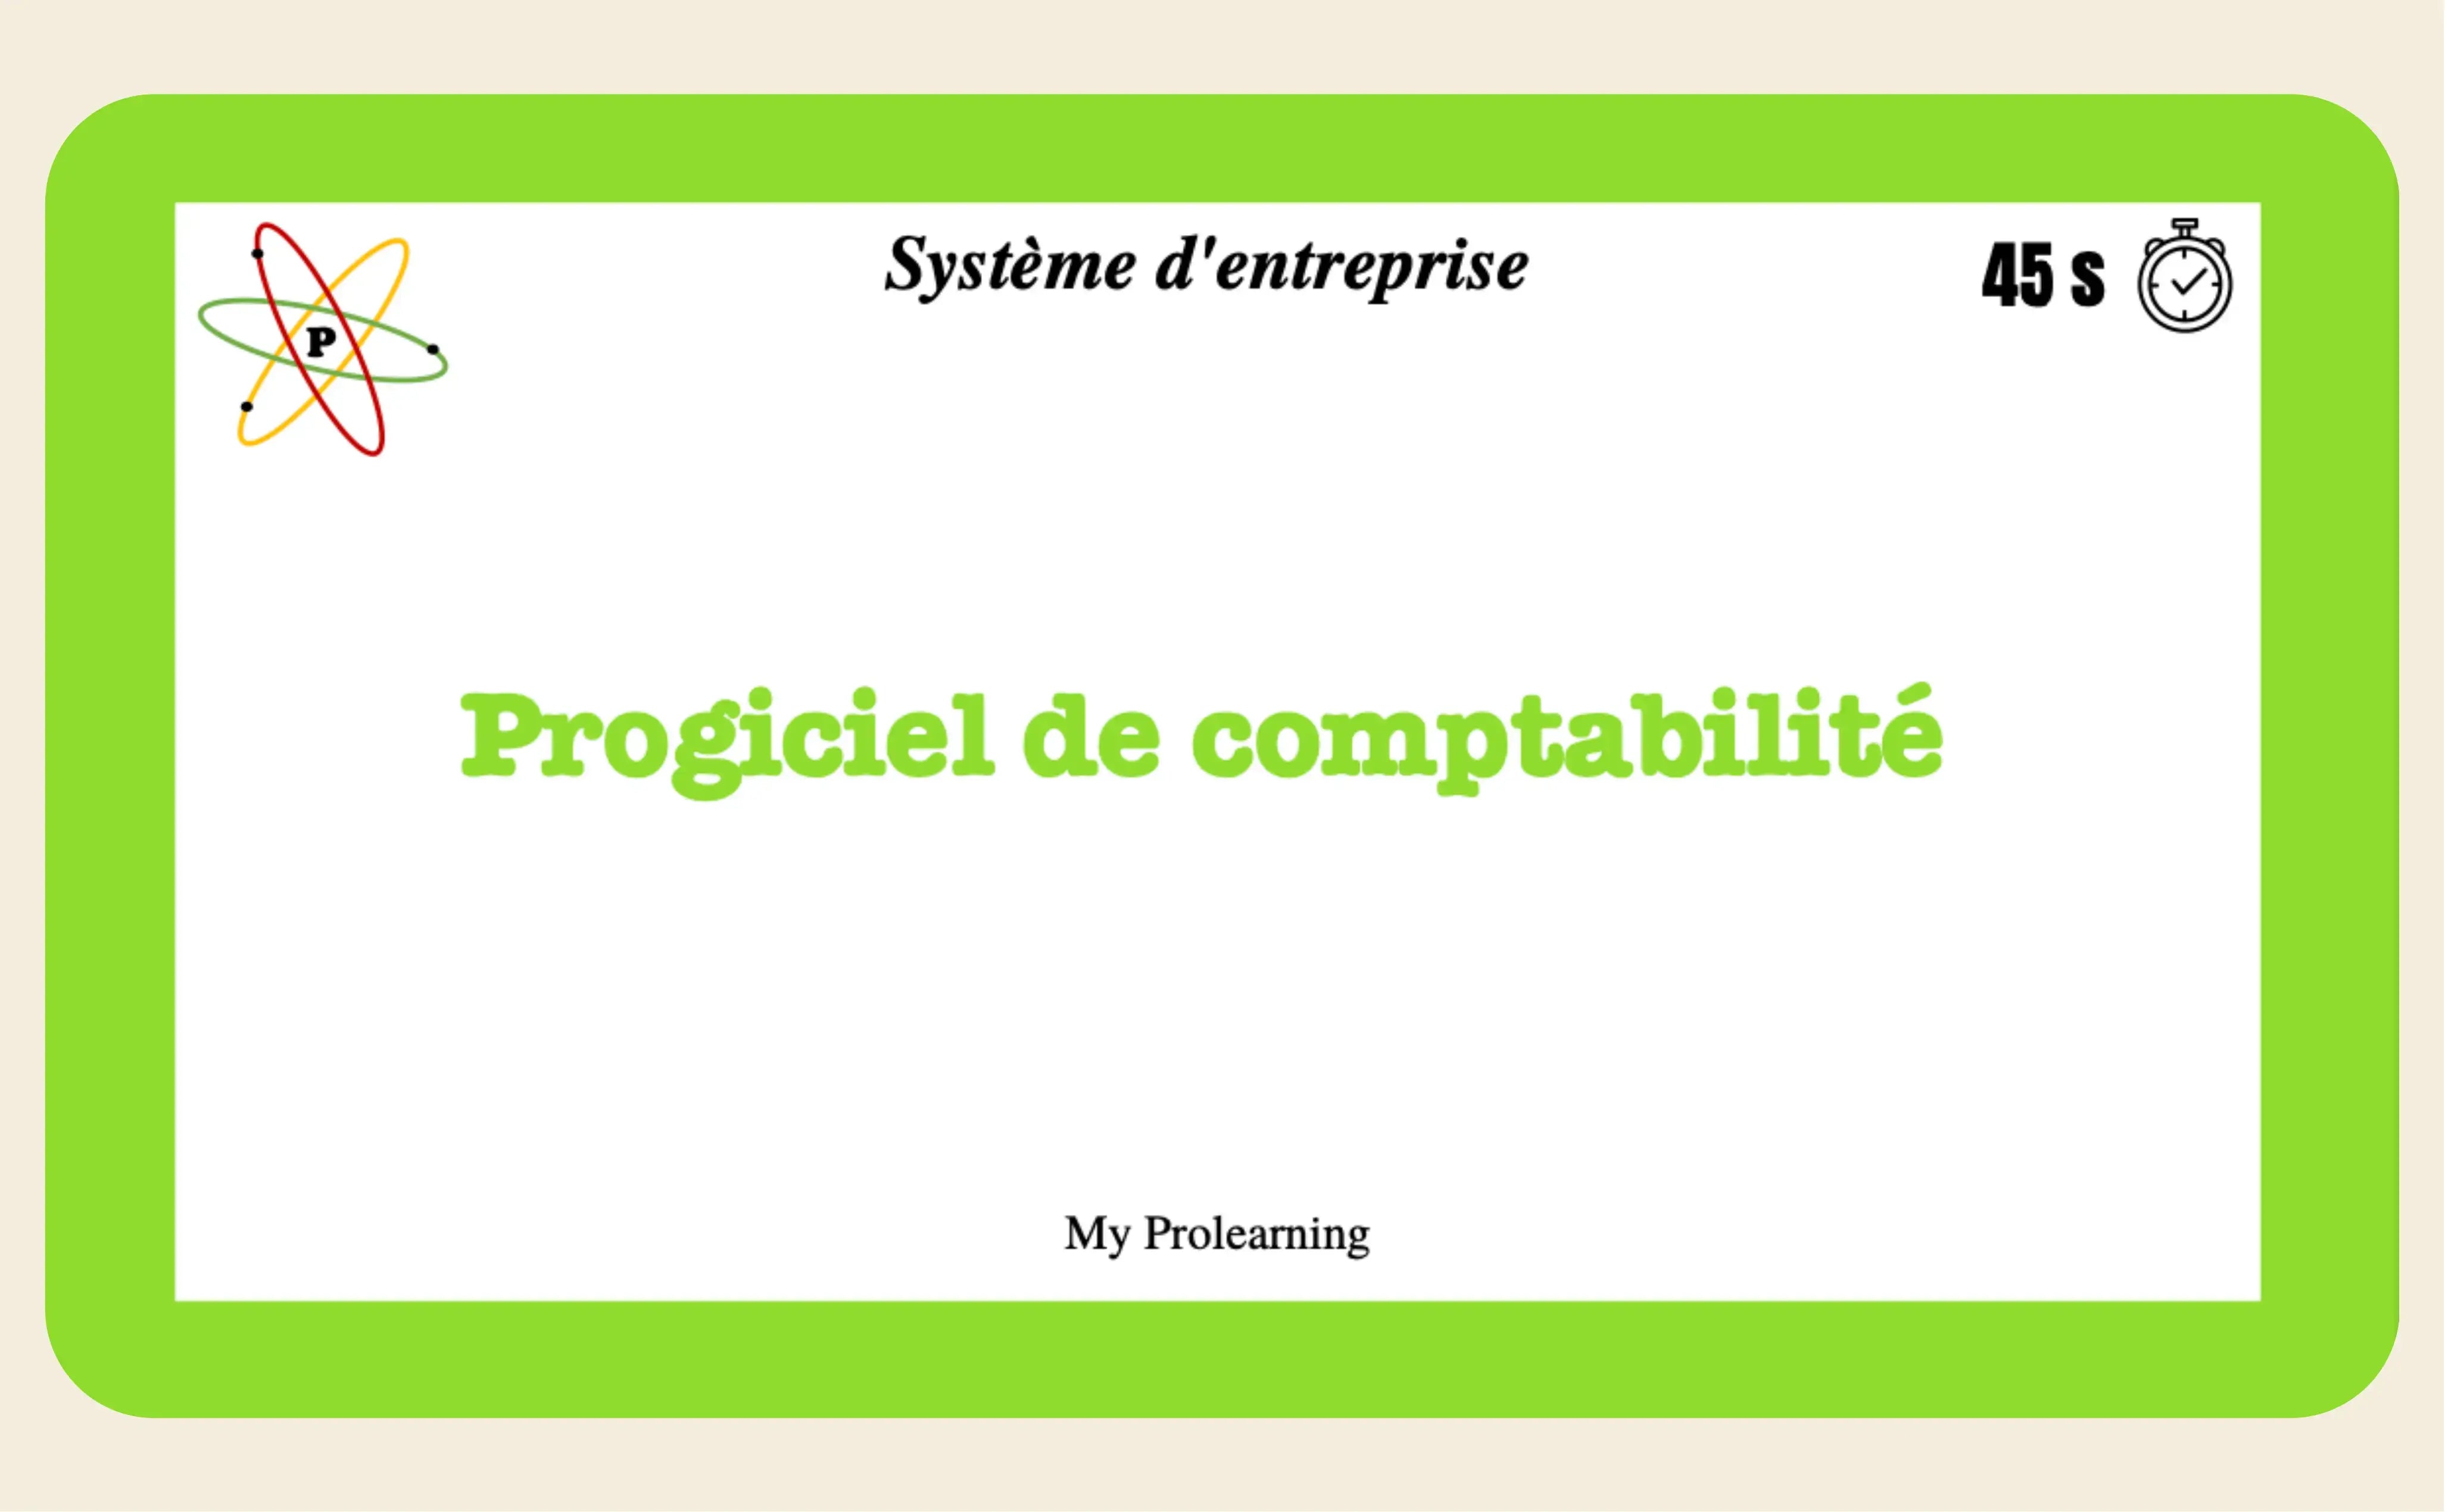 FICHES SYSTEMES D'ENTREPRISE - My Prolearning 